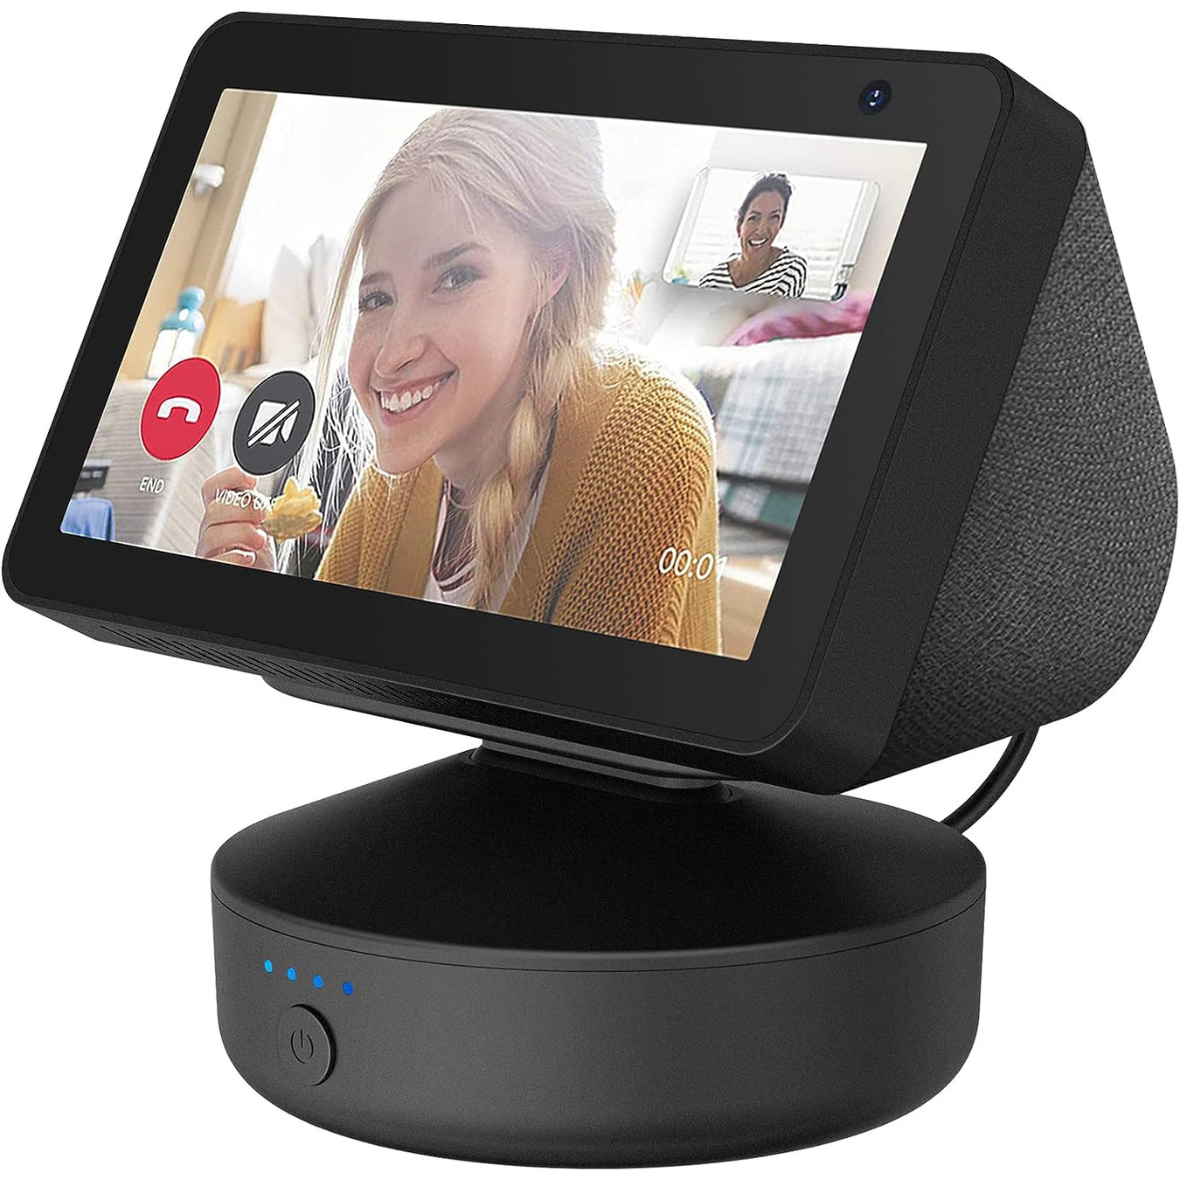 Made for  Alexa Echo Show 5 and Echo Show 8 Adjustable Stand - PlusAcc